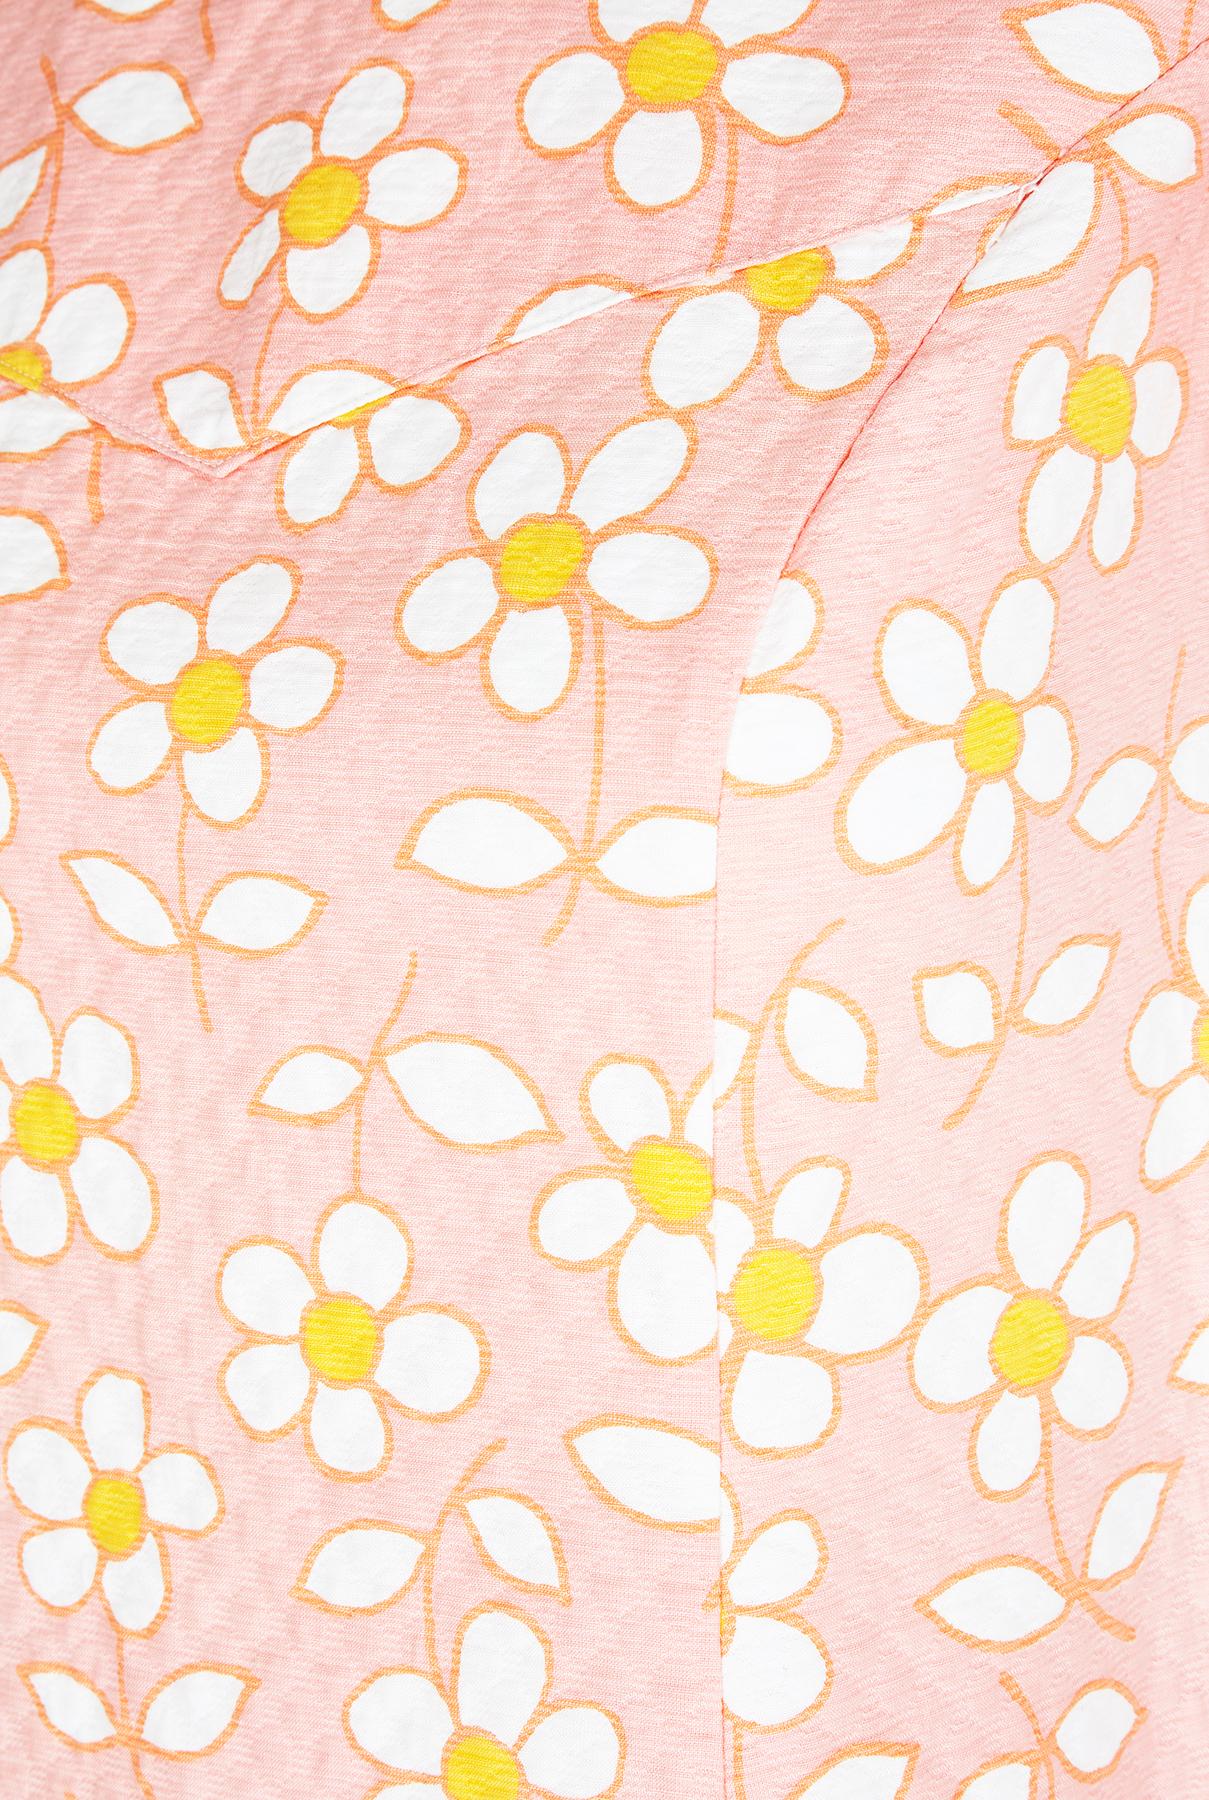 I picked this wonderful original 1960s A-line dress up on my travels to the south of France. It’s certainly got the look of Courreges about it, with its graphic yellow and white floral daisy print pattern against a bright peach background. The